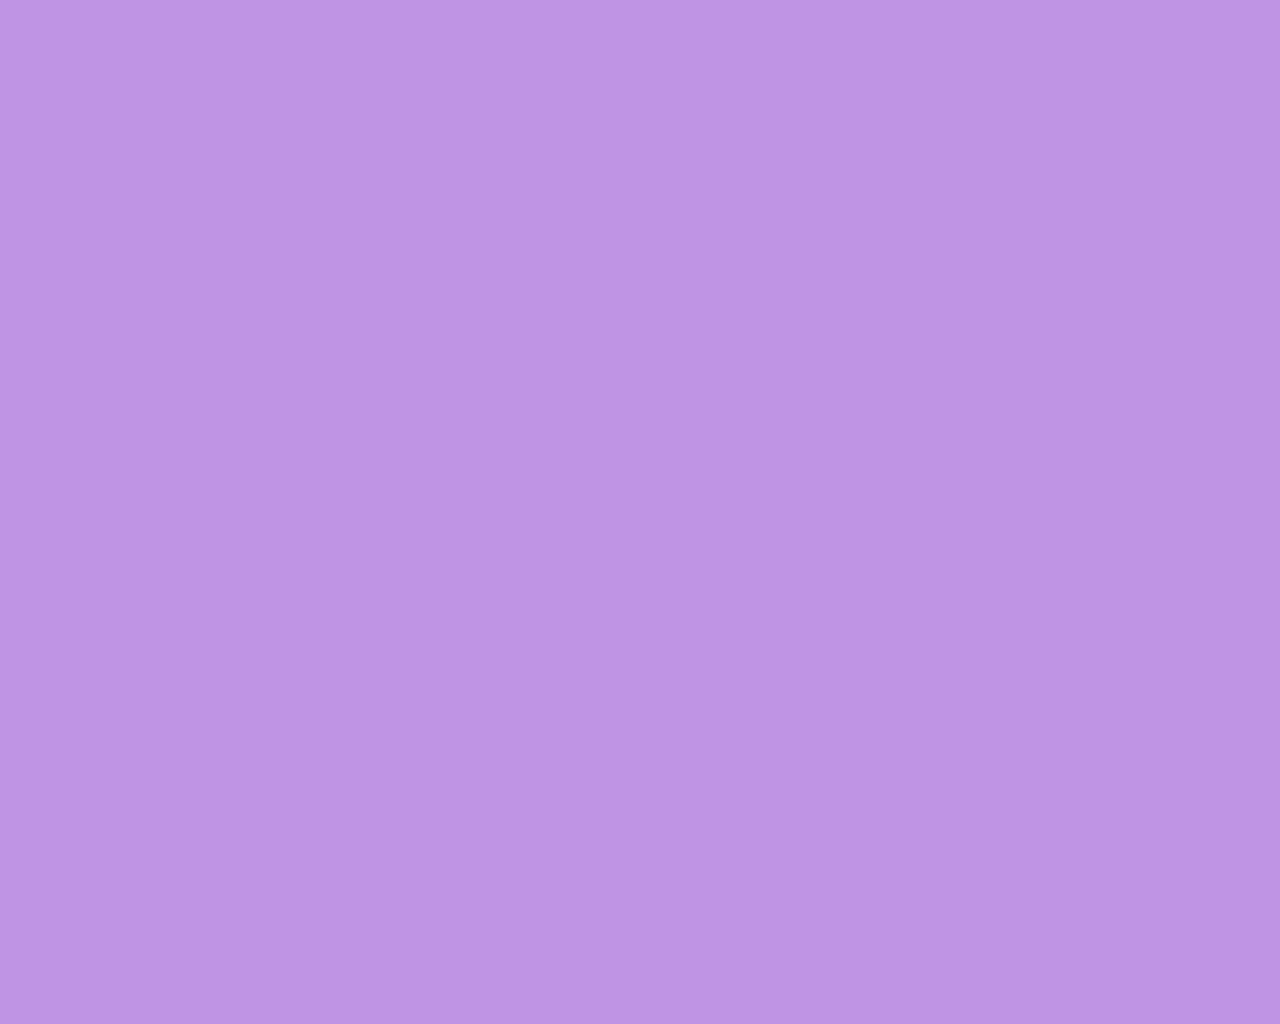  1280x1024 resolution Bright Lavender solid color background view 1280x1024